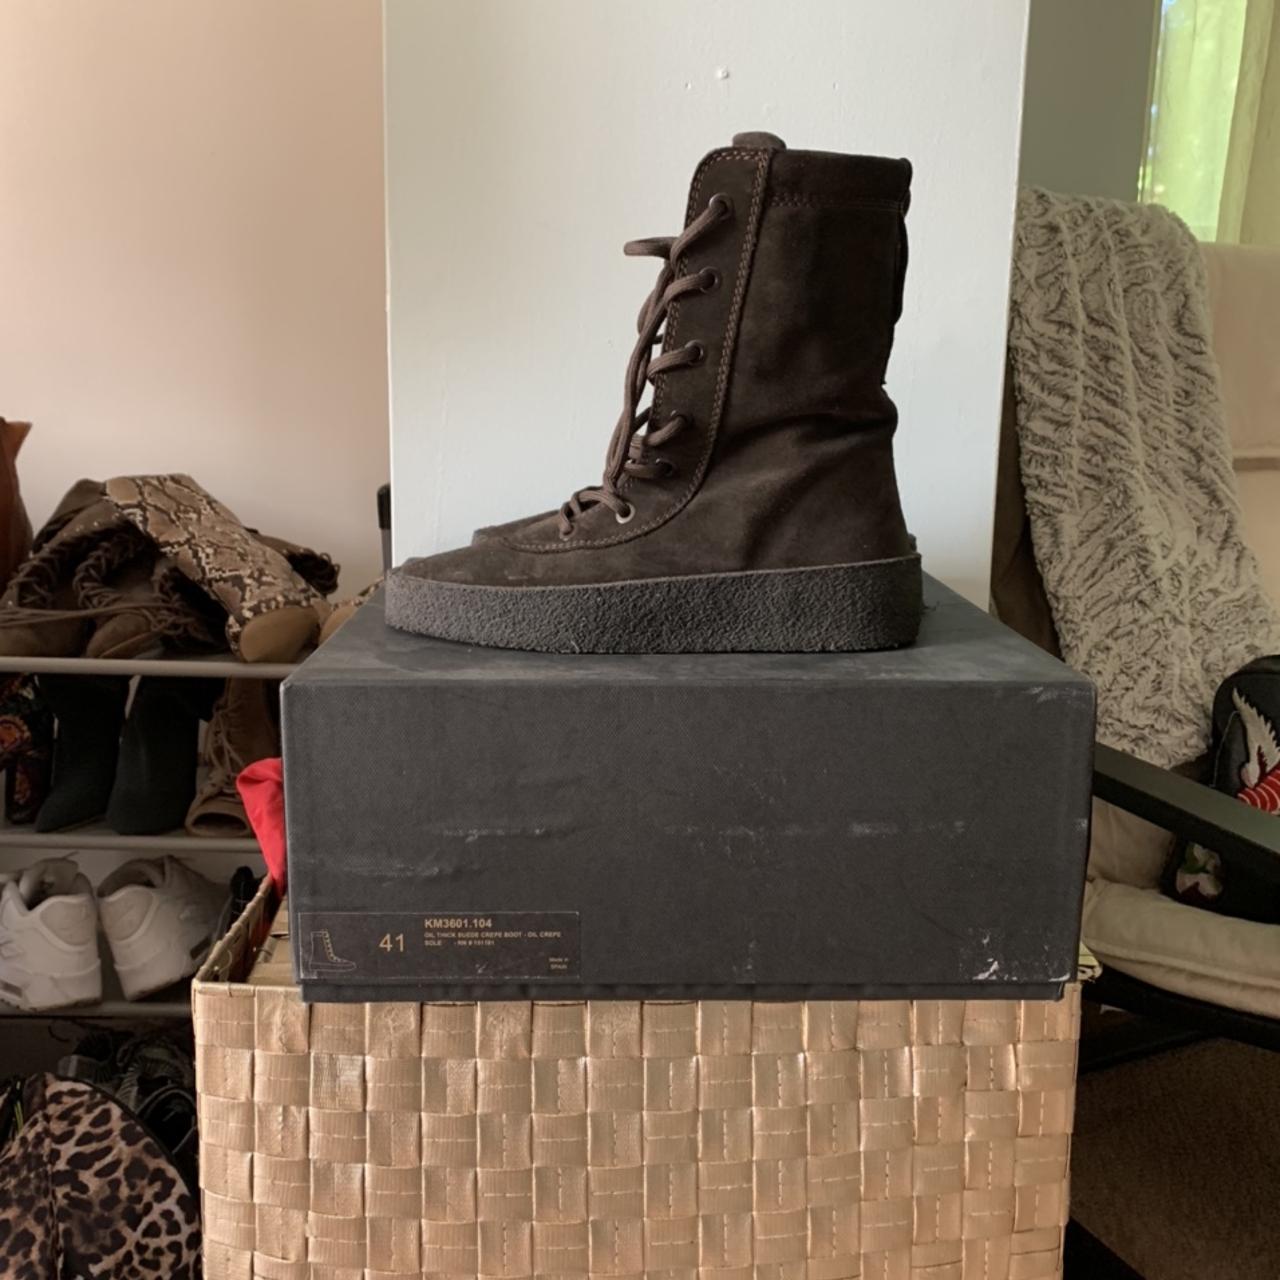 YEEZY SEASON 4 crepe boots, Authentic , Comes with